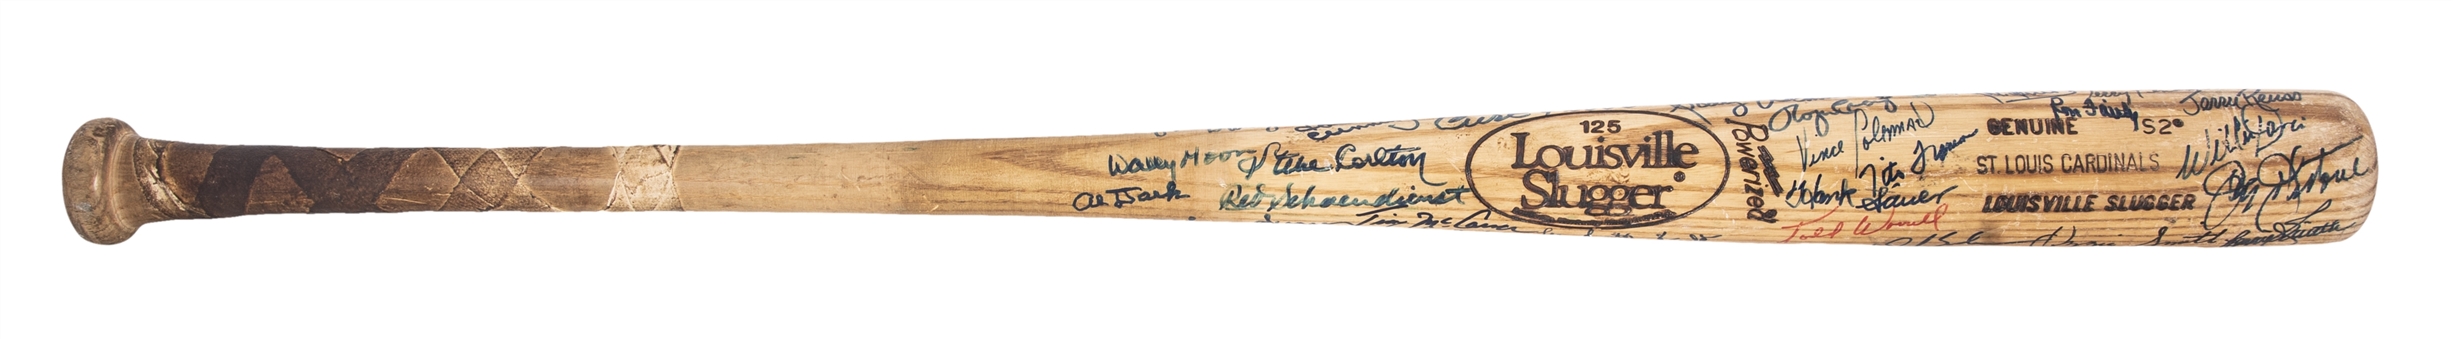 St. Louis Cardinals Game Used & Multi-Signed Louisville Slugger S2 Model Bat Signed by 40+ Including Gibson, Smith & Carlton (Beckett PreCert)